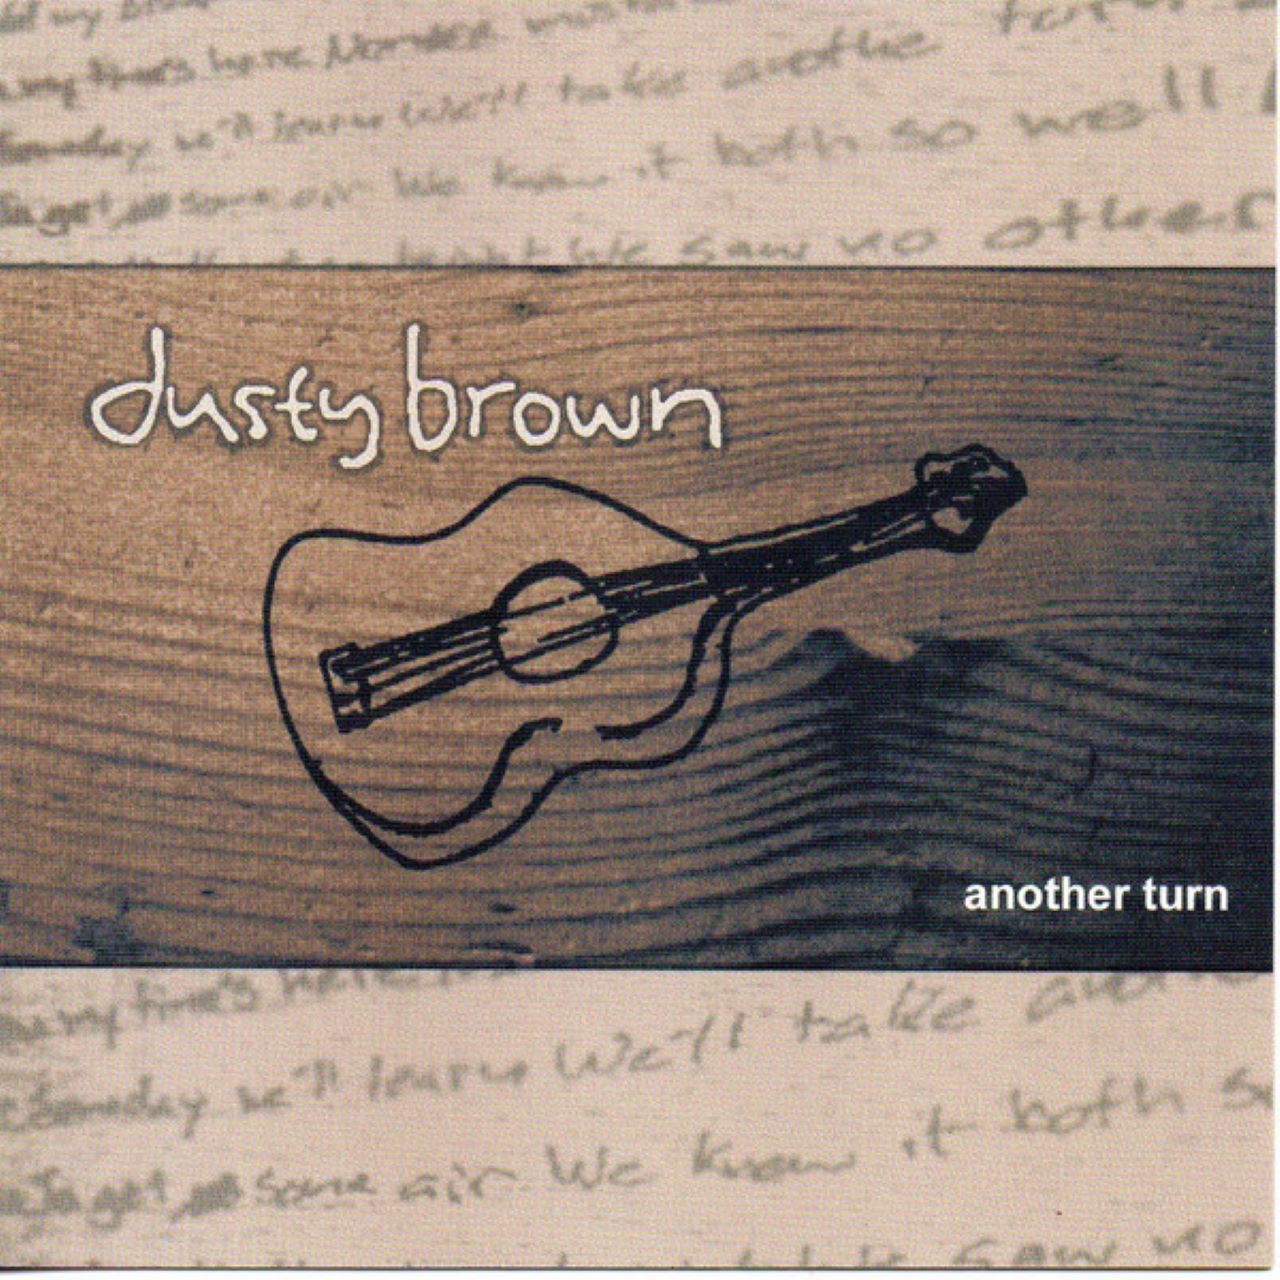 Dusty Brown - Another Turn cover album